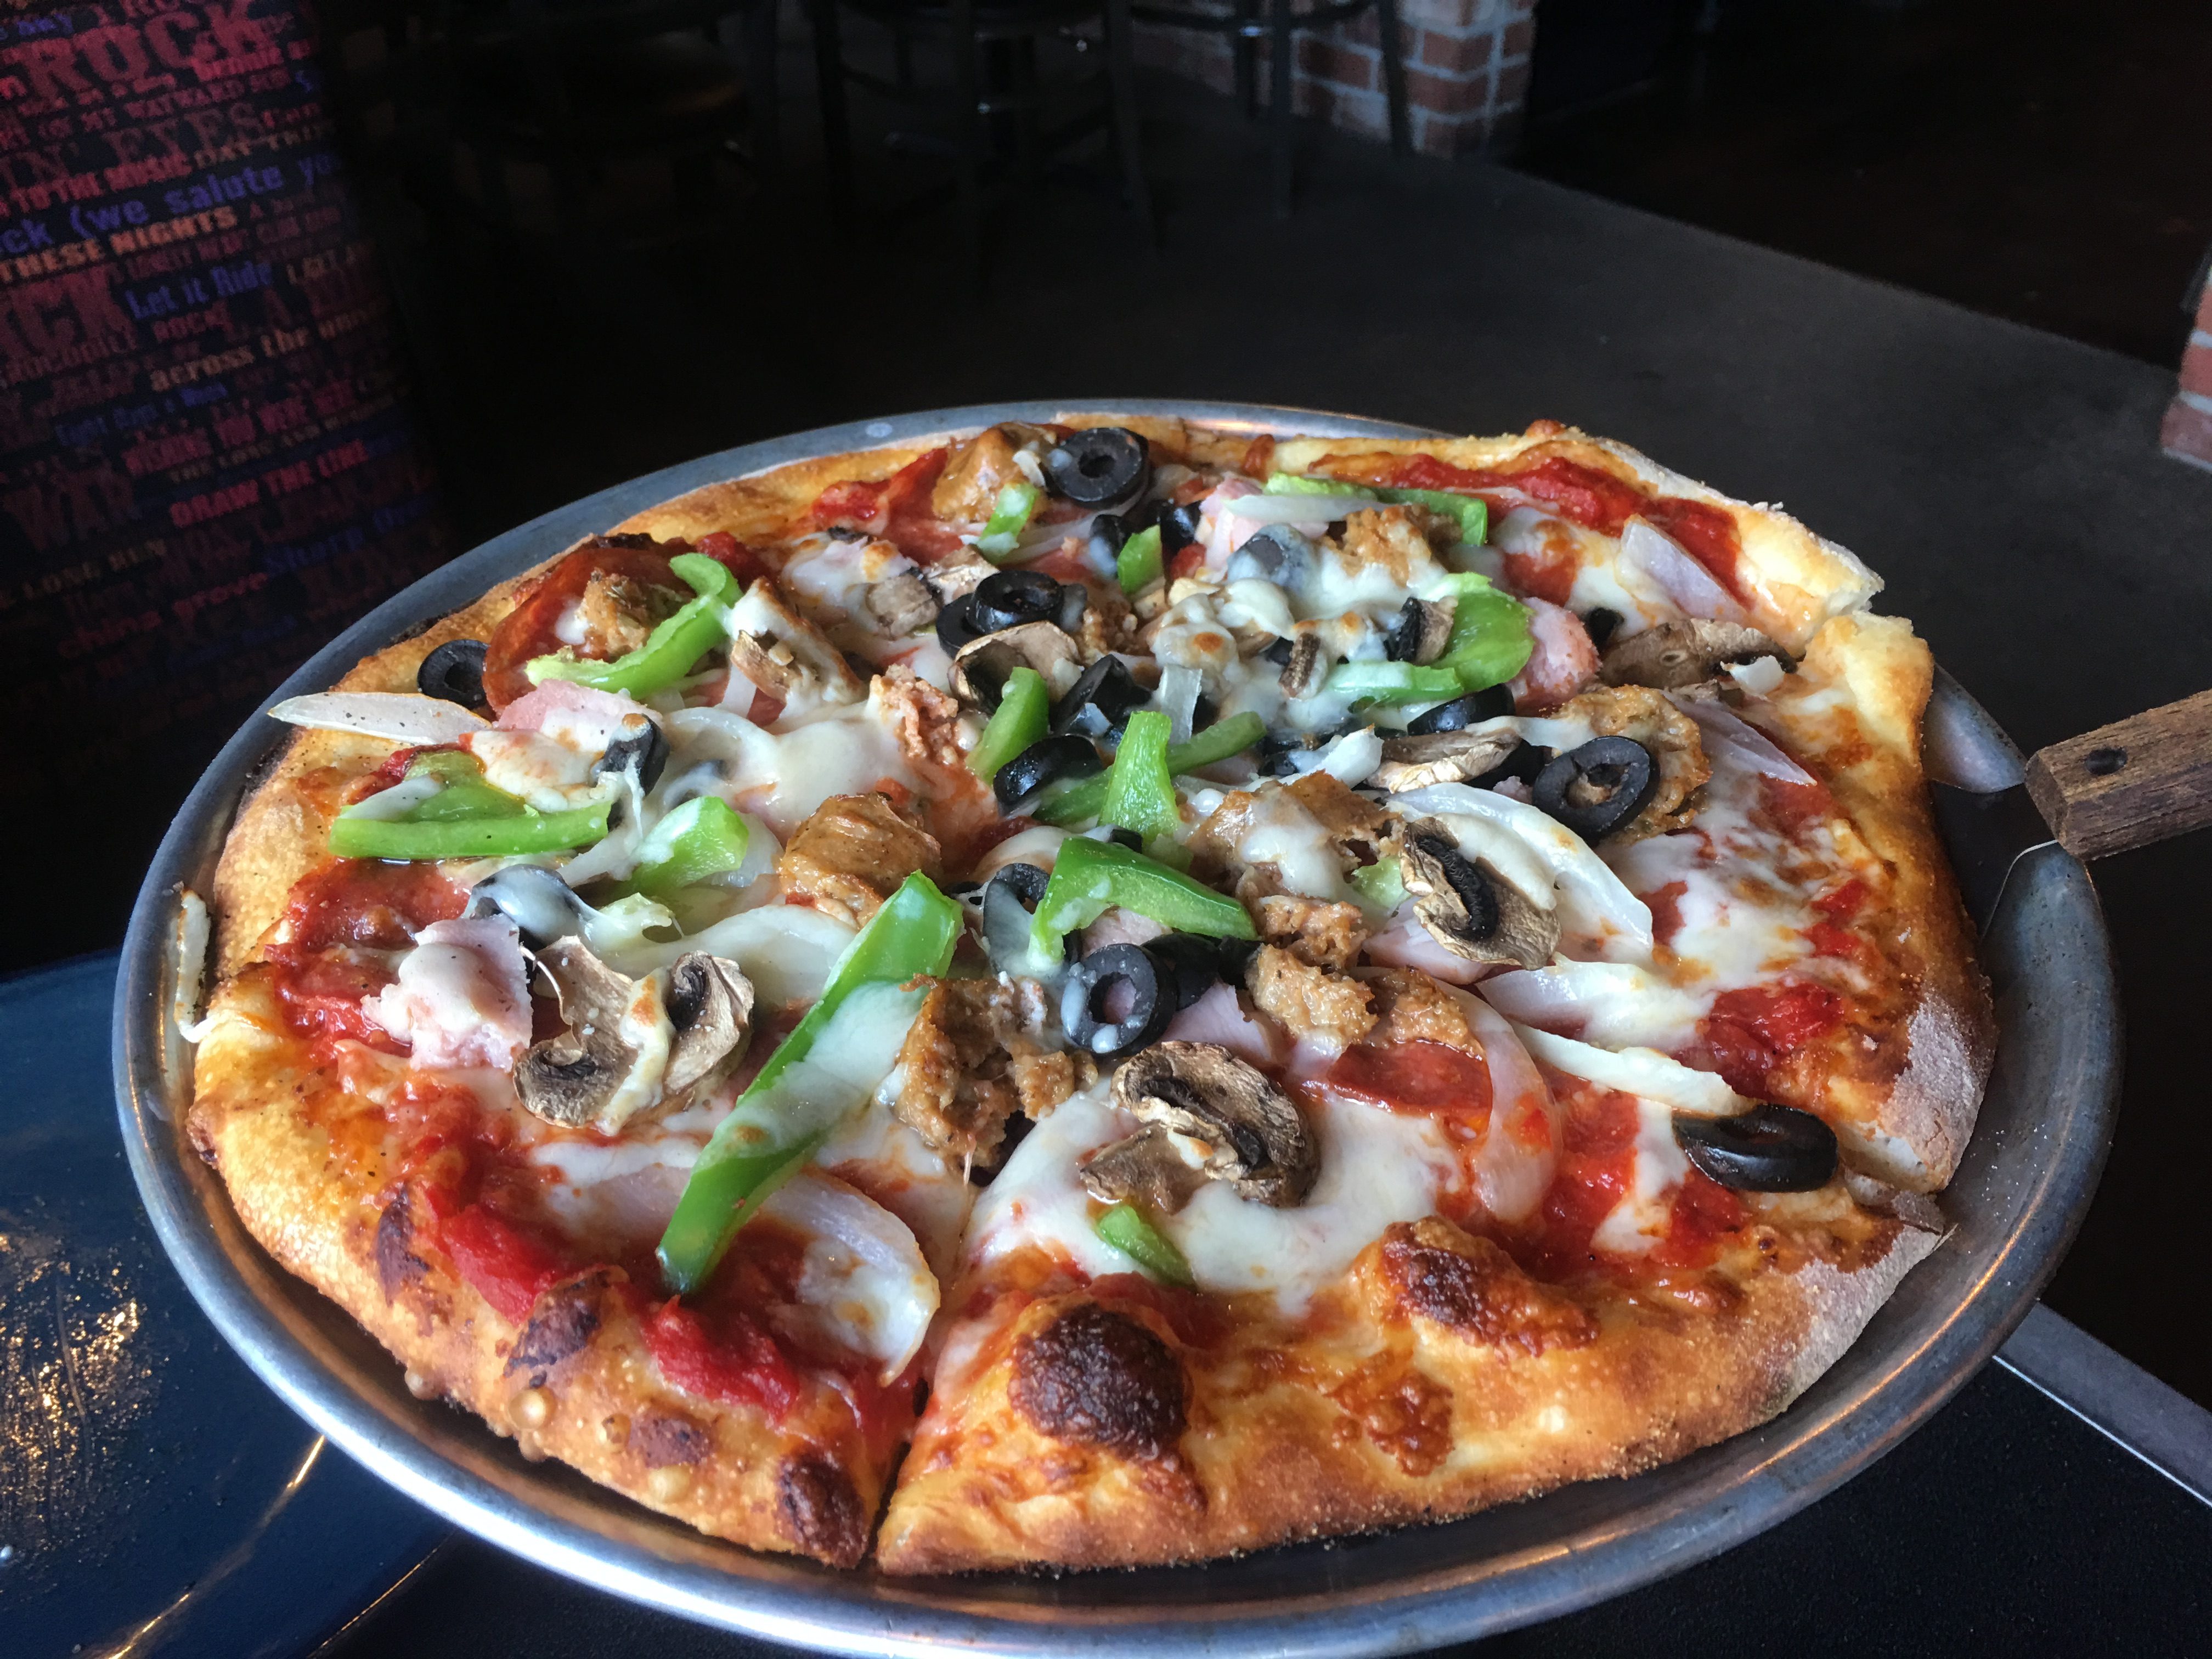 51% Off Fare at The Rock - OR: The Rock Wood Fired Pizza & Spirits